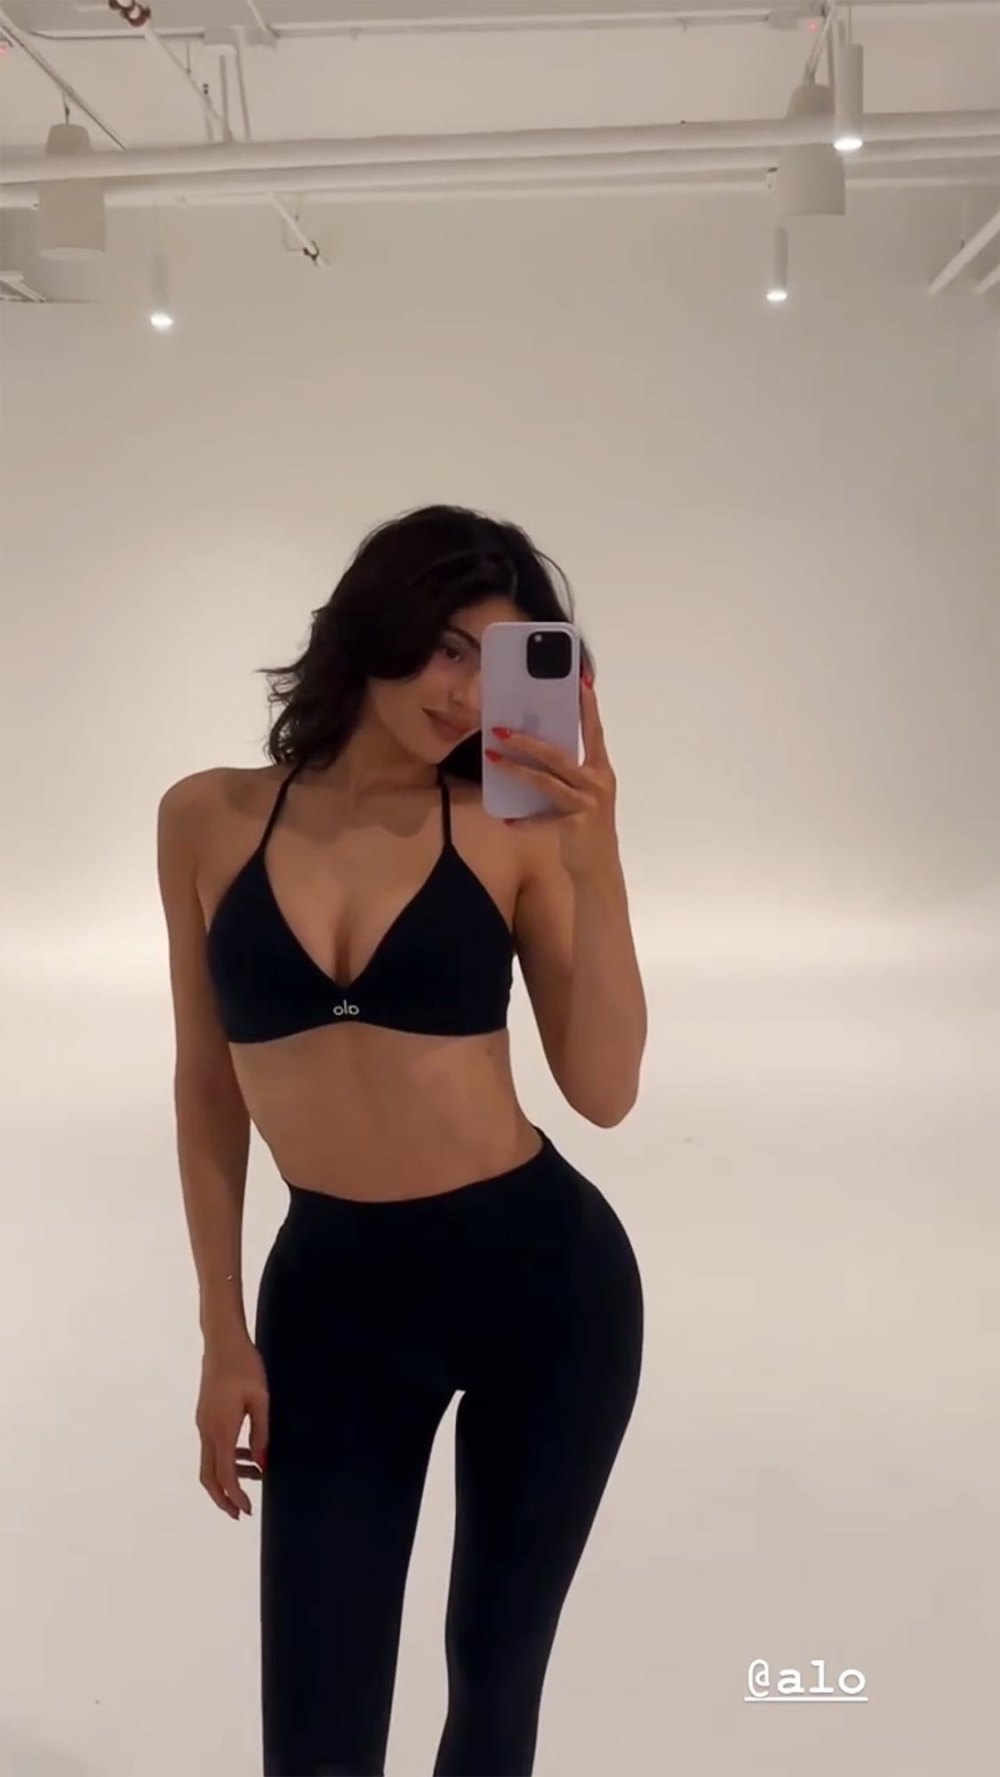 Kylie Jenner Shows Off Her Toned Body in Sports Bra and Leggings